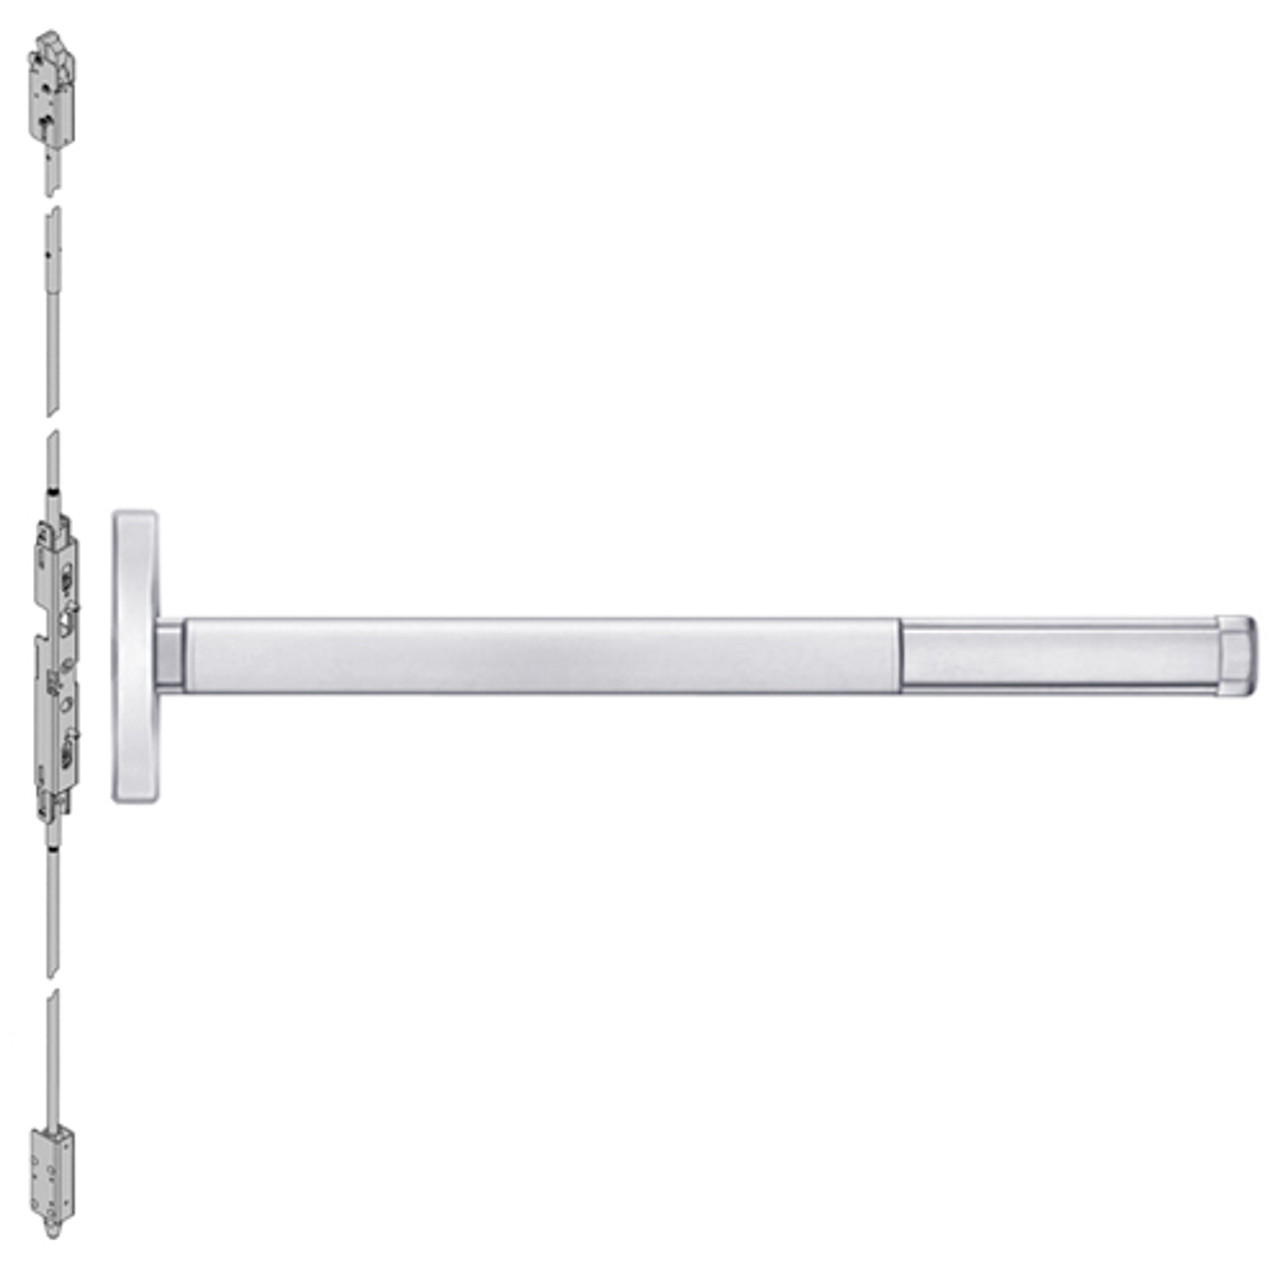 DE2602LBR-625-36 PHI 2600 Series Concealed Vertical Rod Exit Device with Delayed Egress Prepped for Dummy Trim in Bright Chrome Finish